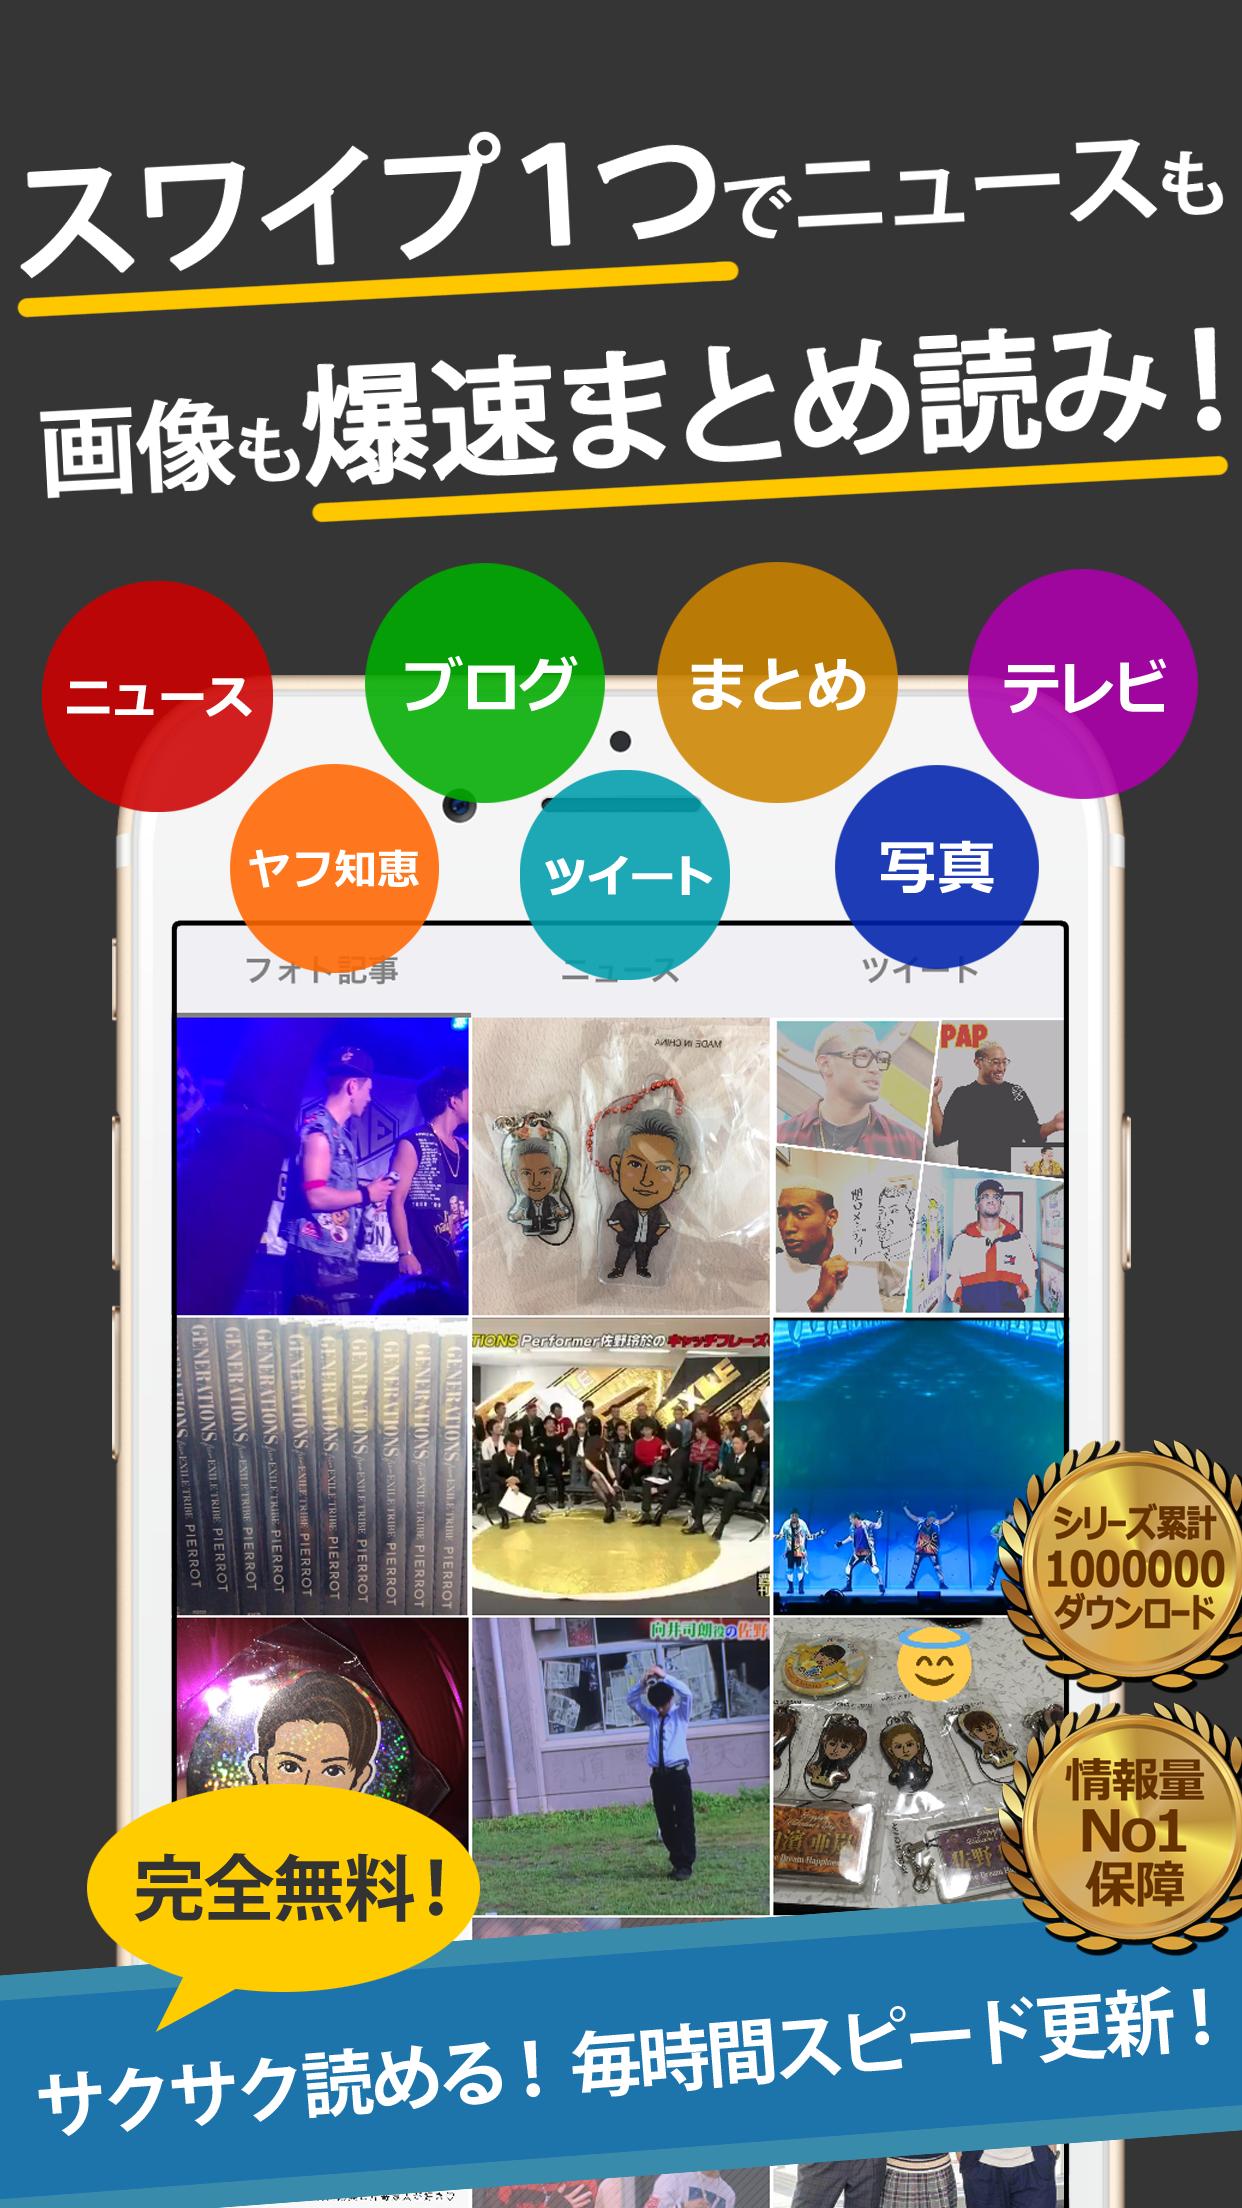 Geneまとめったー For Generations For Android Apk Download